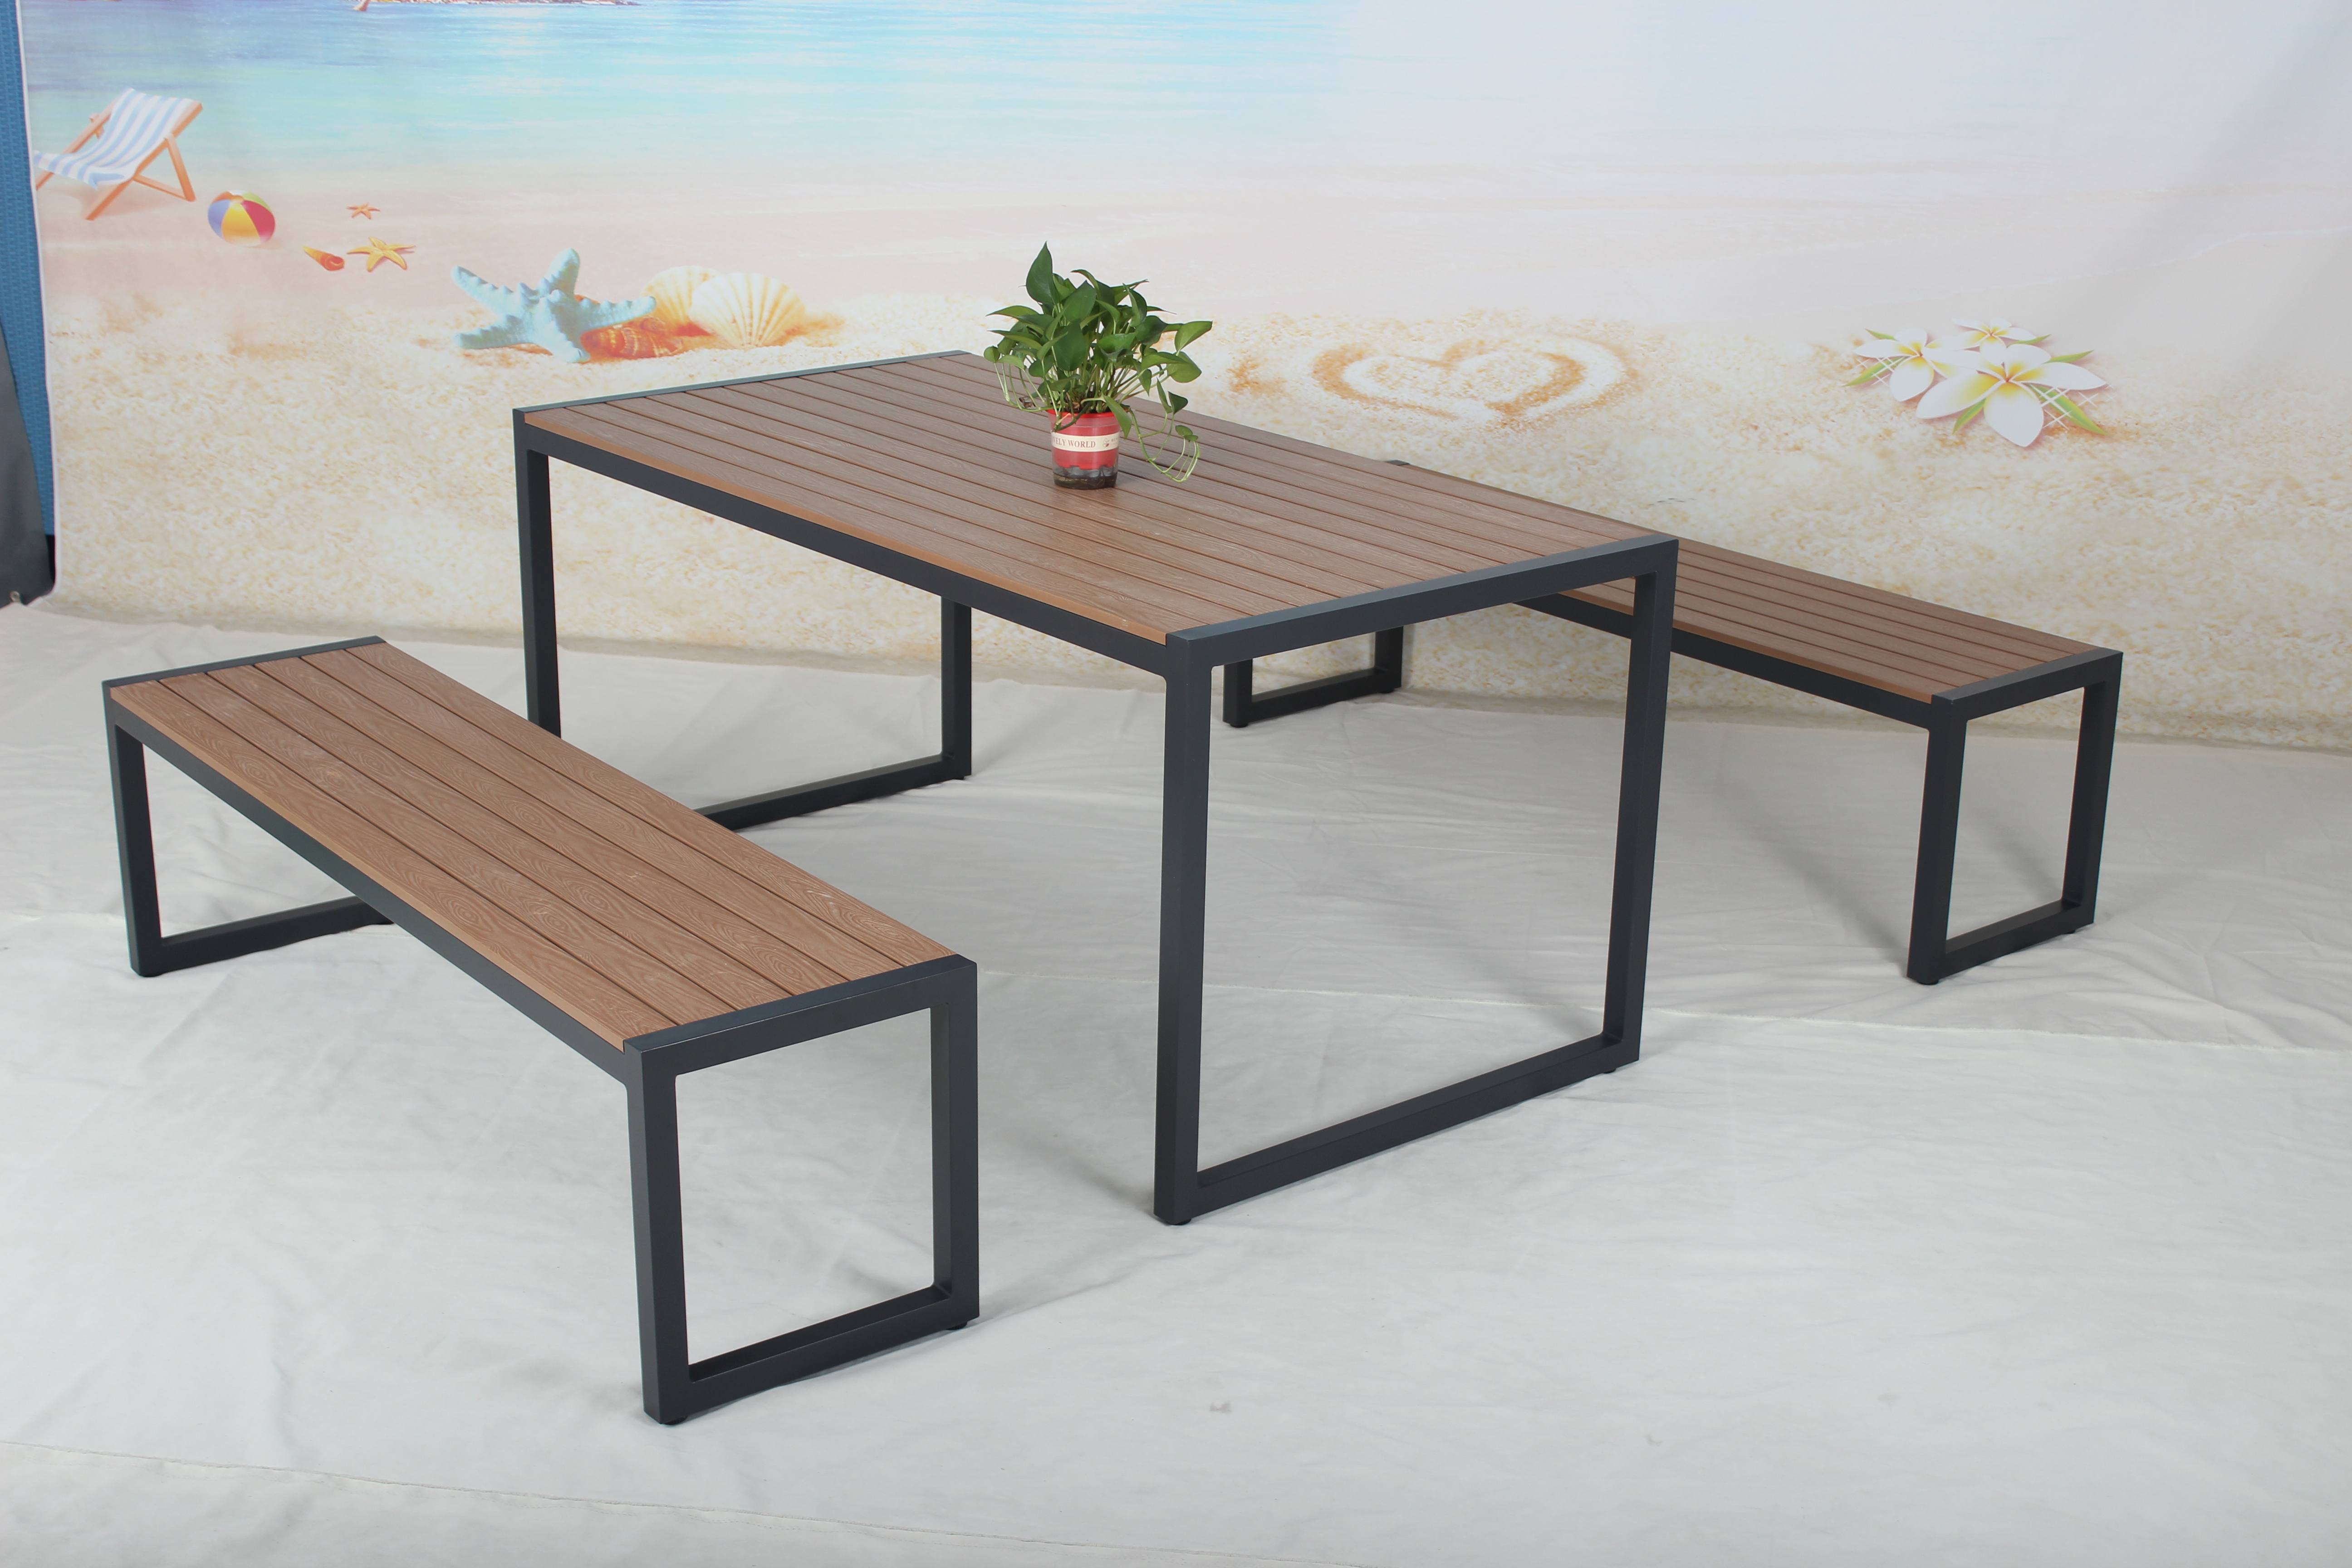 Plastic wood garden dining table chair set